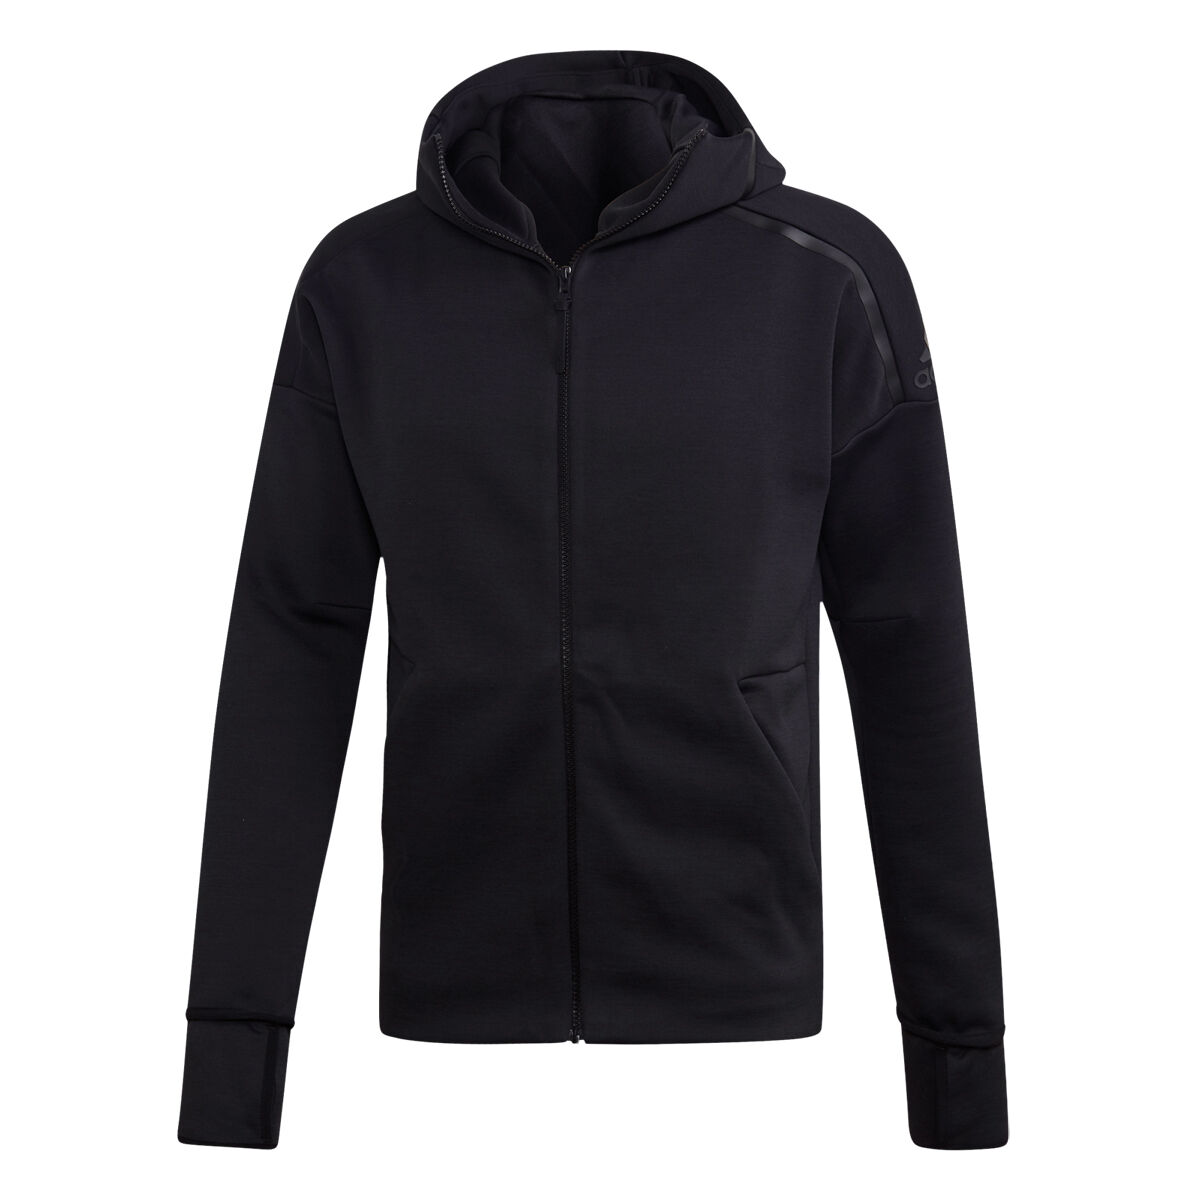 adidas zne fast release hoody